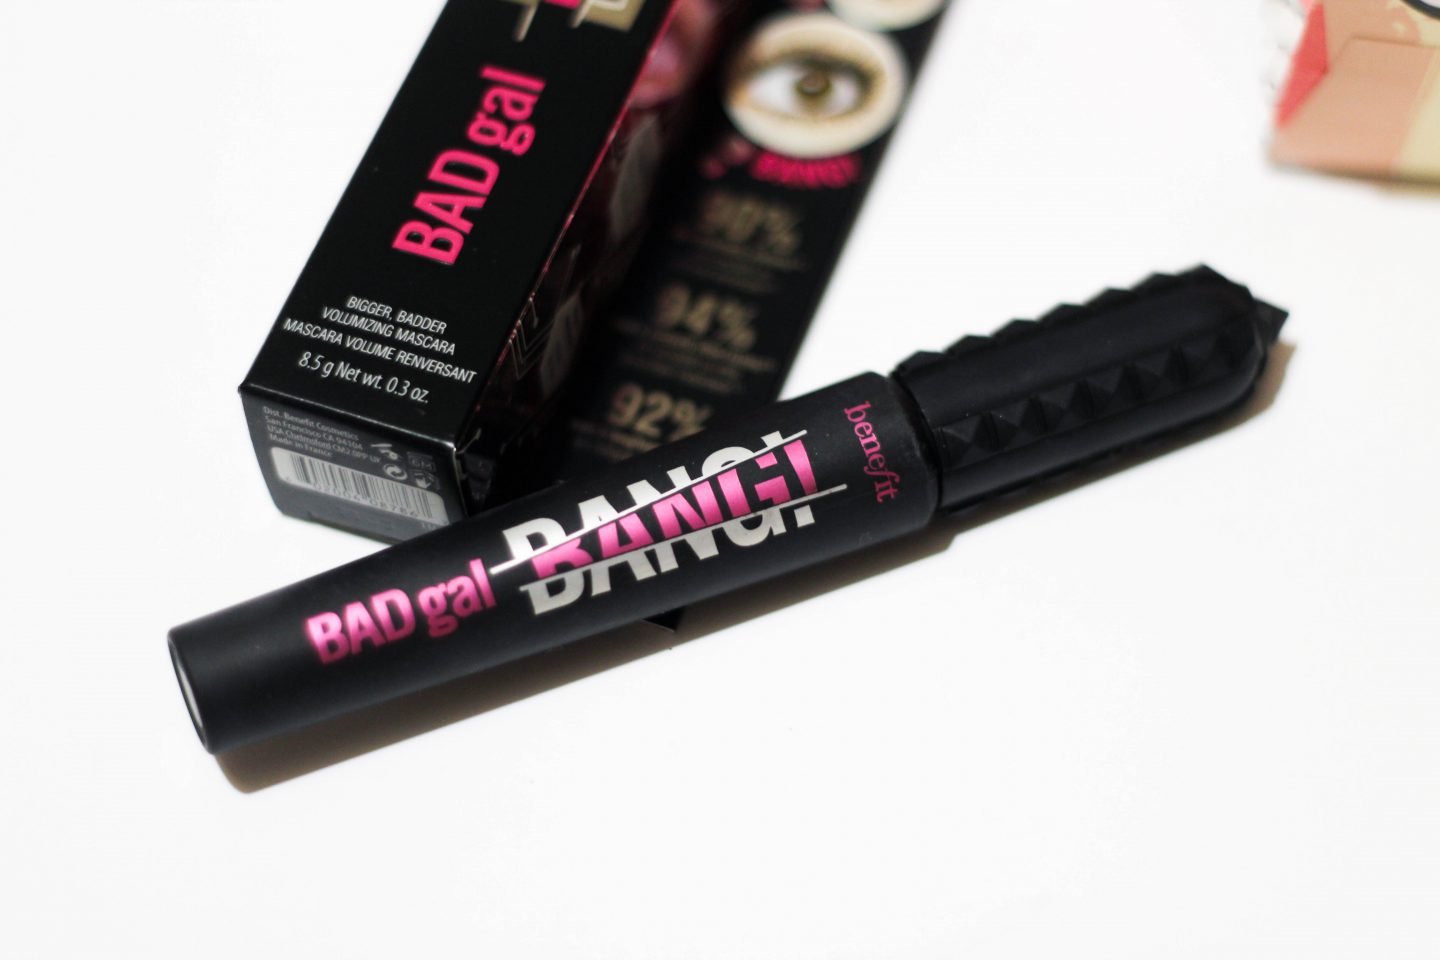 Going #outofthisworld with Benefit BadGal Bang! Mascara